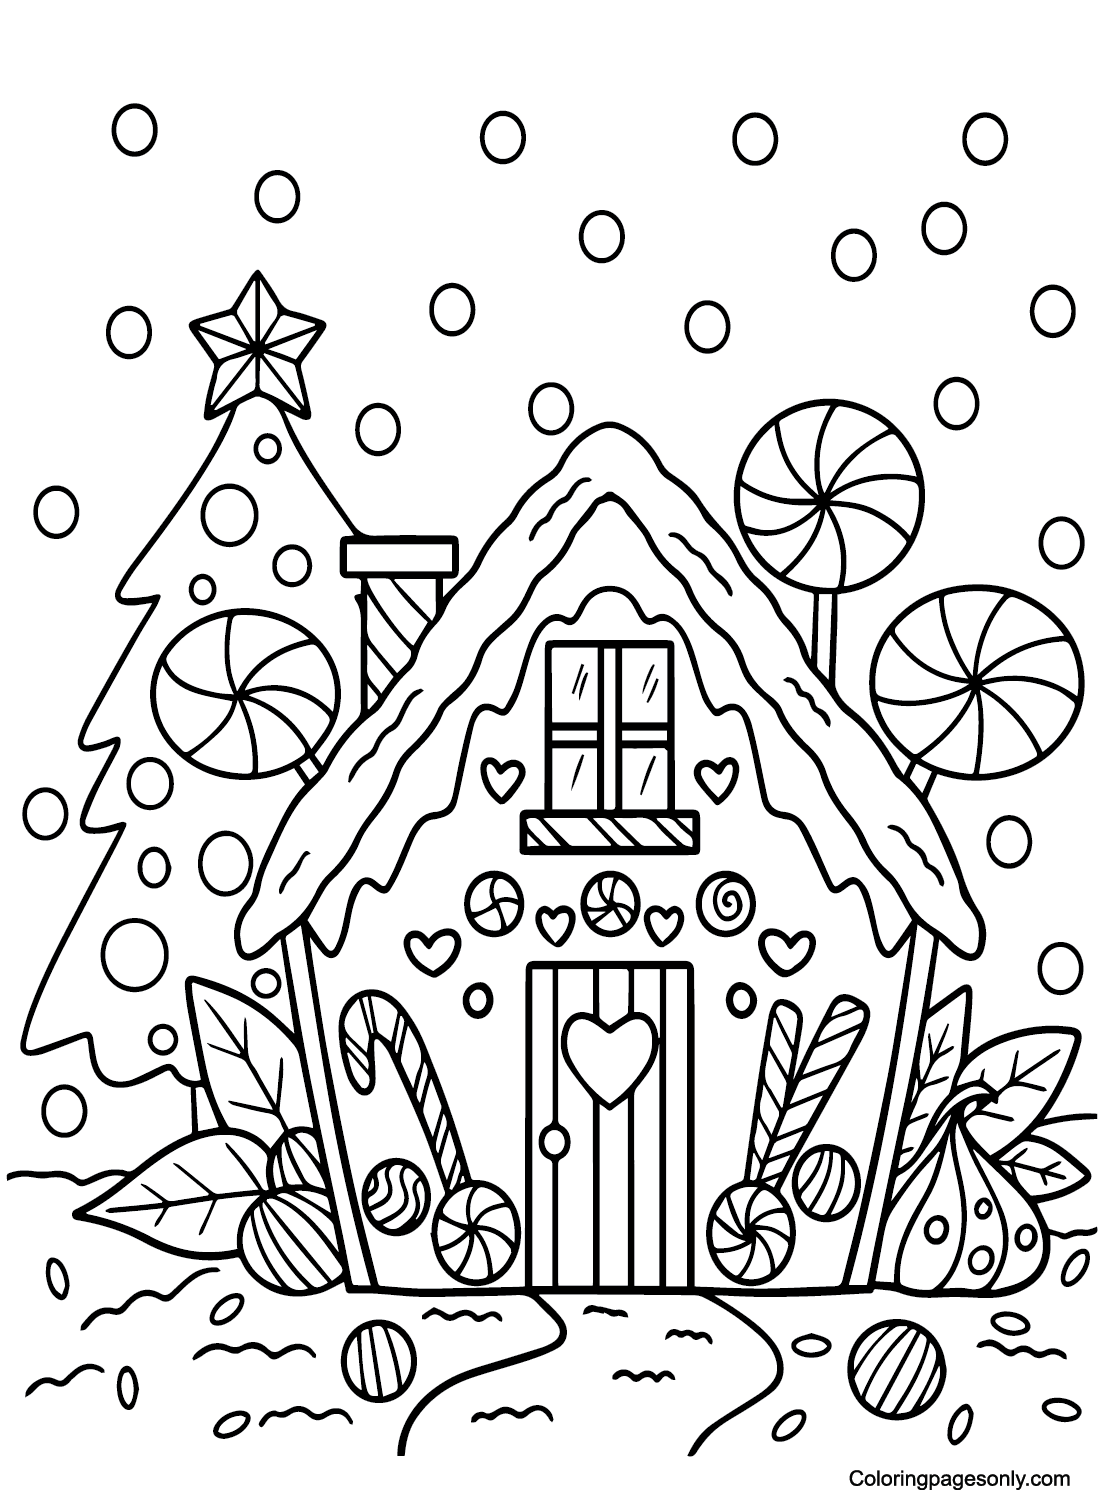 Candyland Images Coloring Page